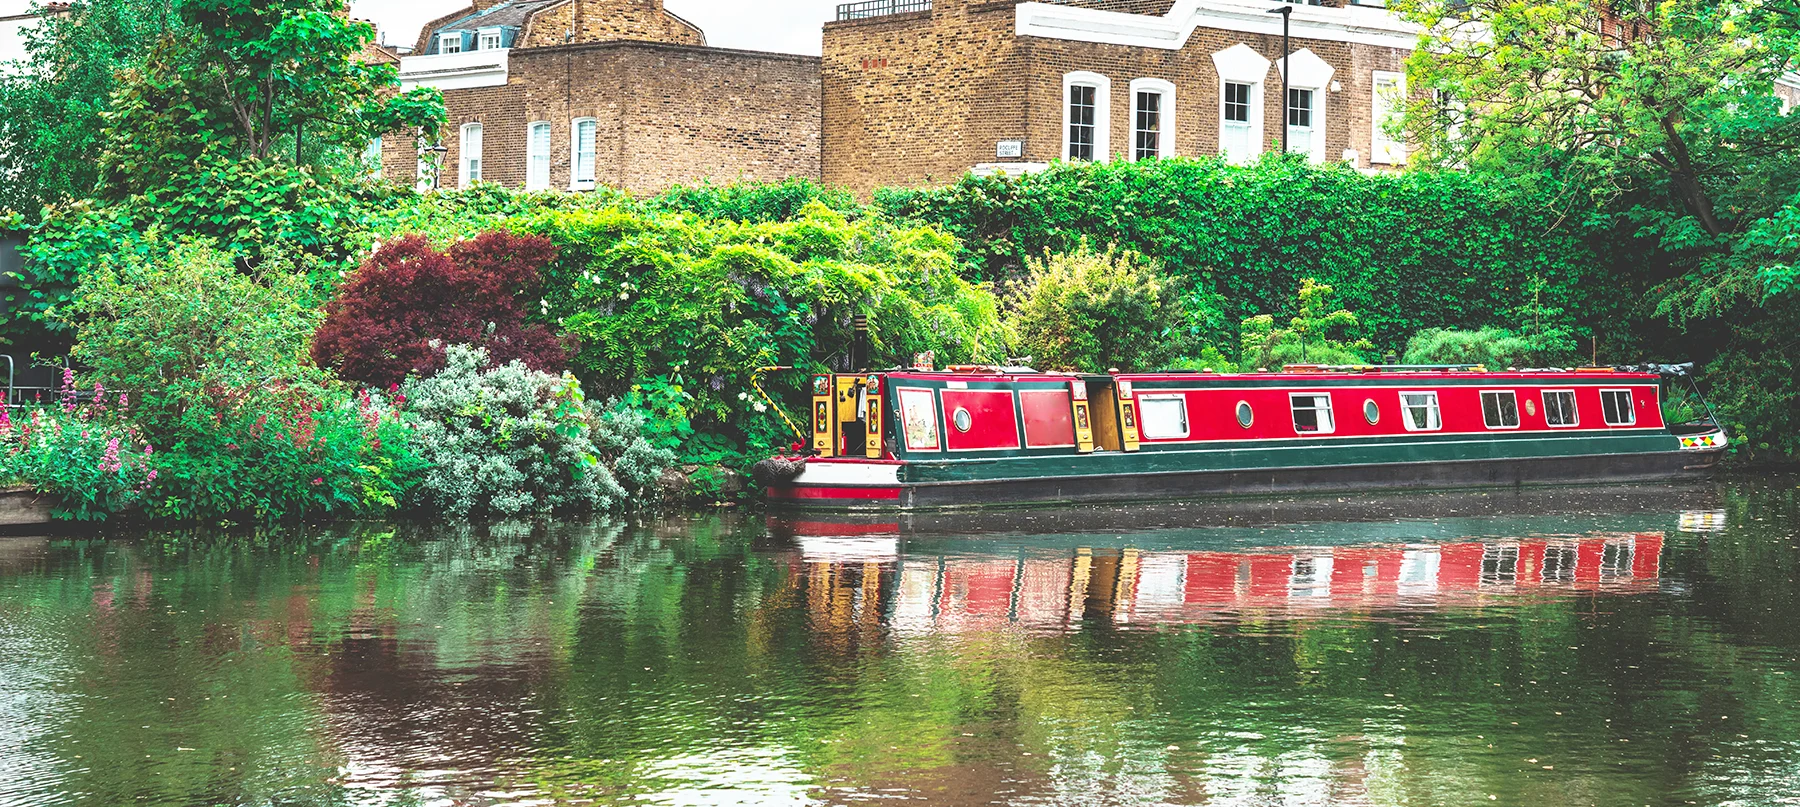 A red barge moored on a canal surrounded by greenery with brick houses in the background. 